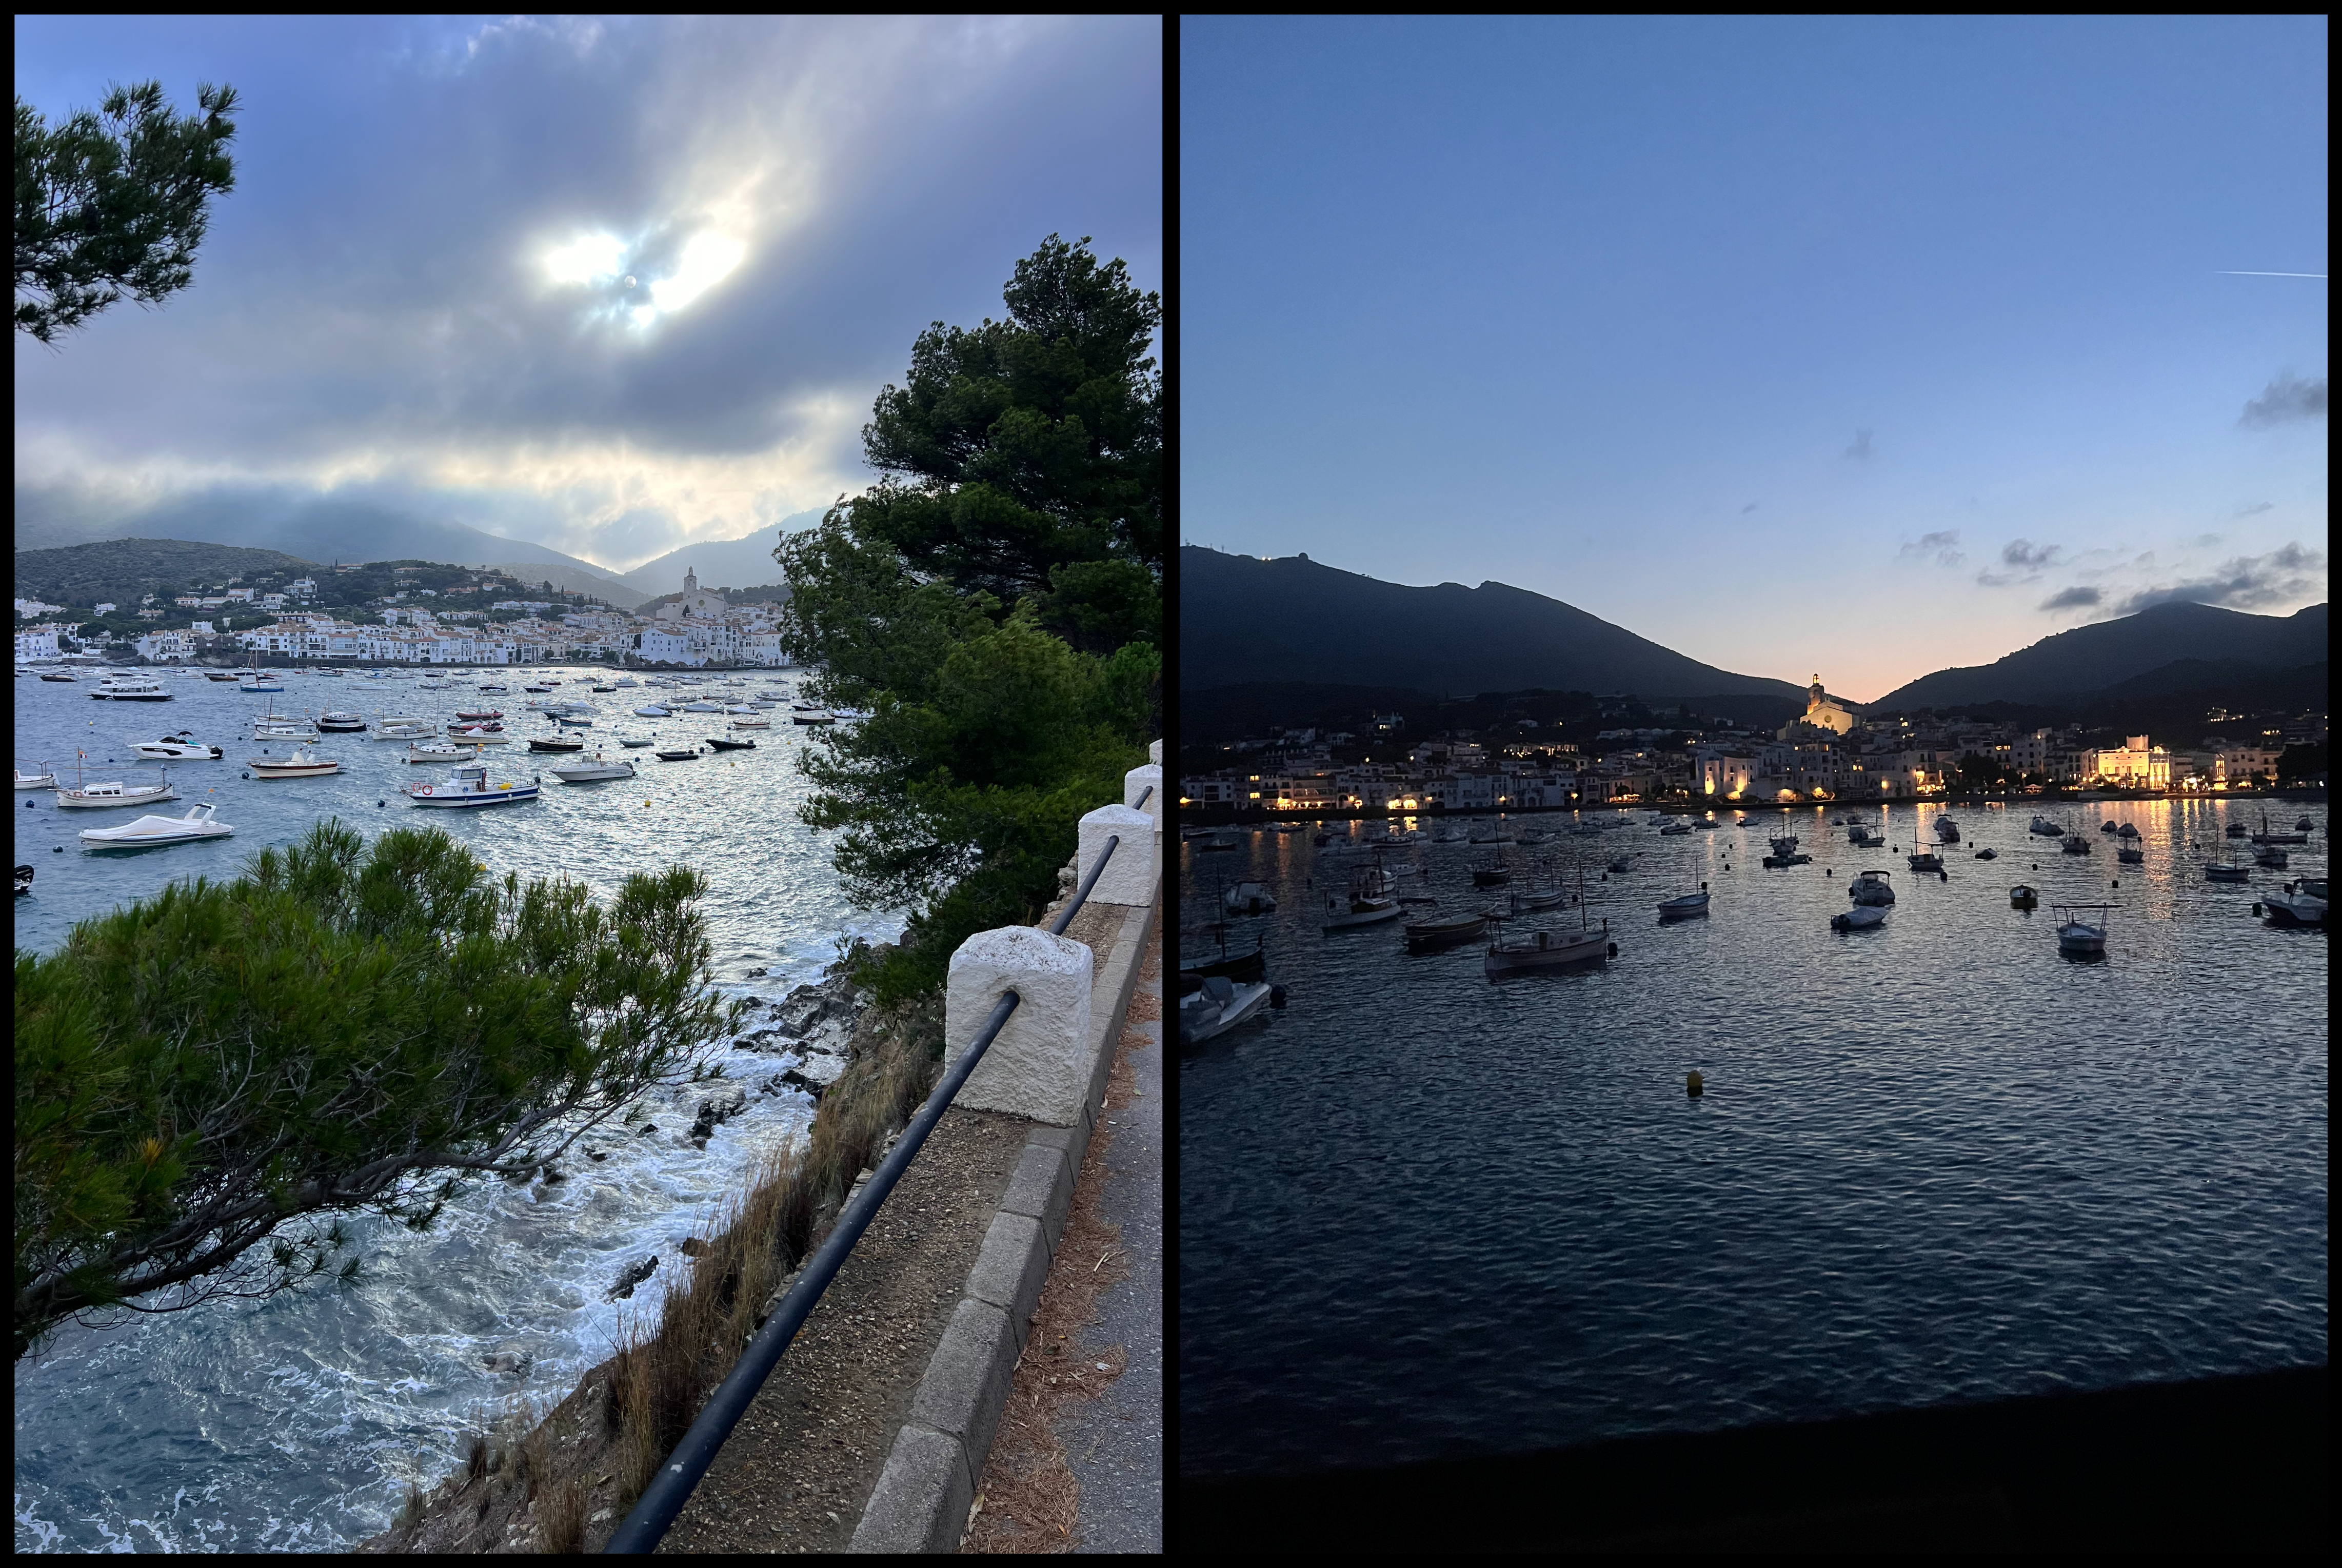 A collage of two views of Cadaqués, Spain. On the left by day, on the right by night. Both are looking across the bay towards Cadaqués with boats in the bay and the town, backed by a church spreading around the bay and up the hill. Green Mountains surround the town.